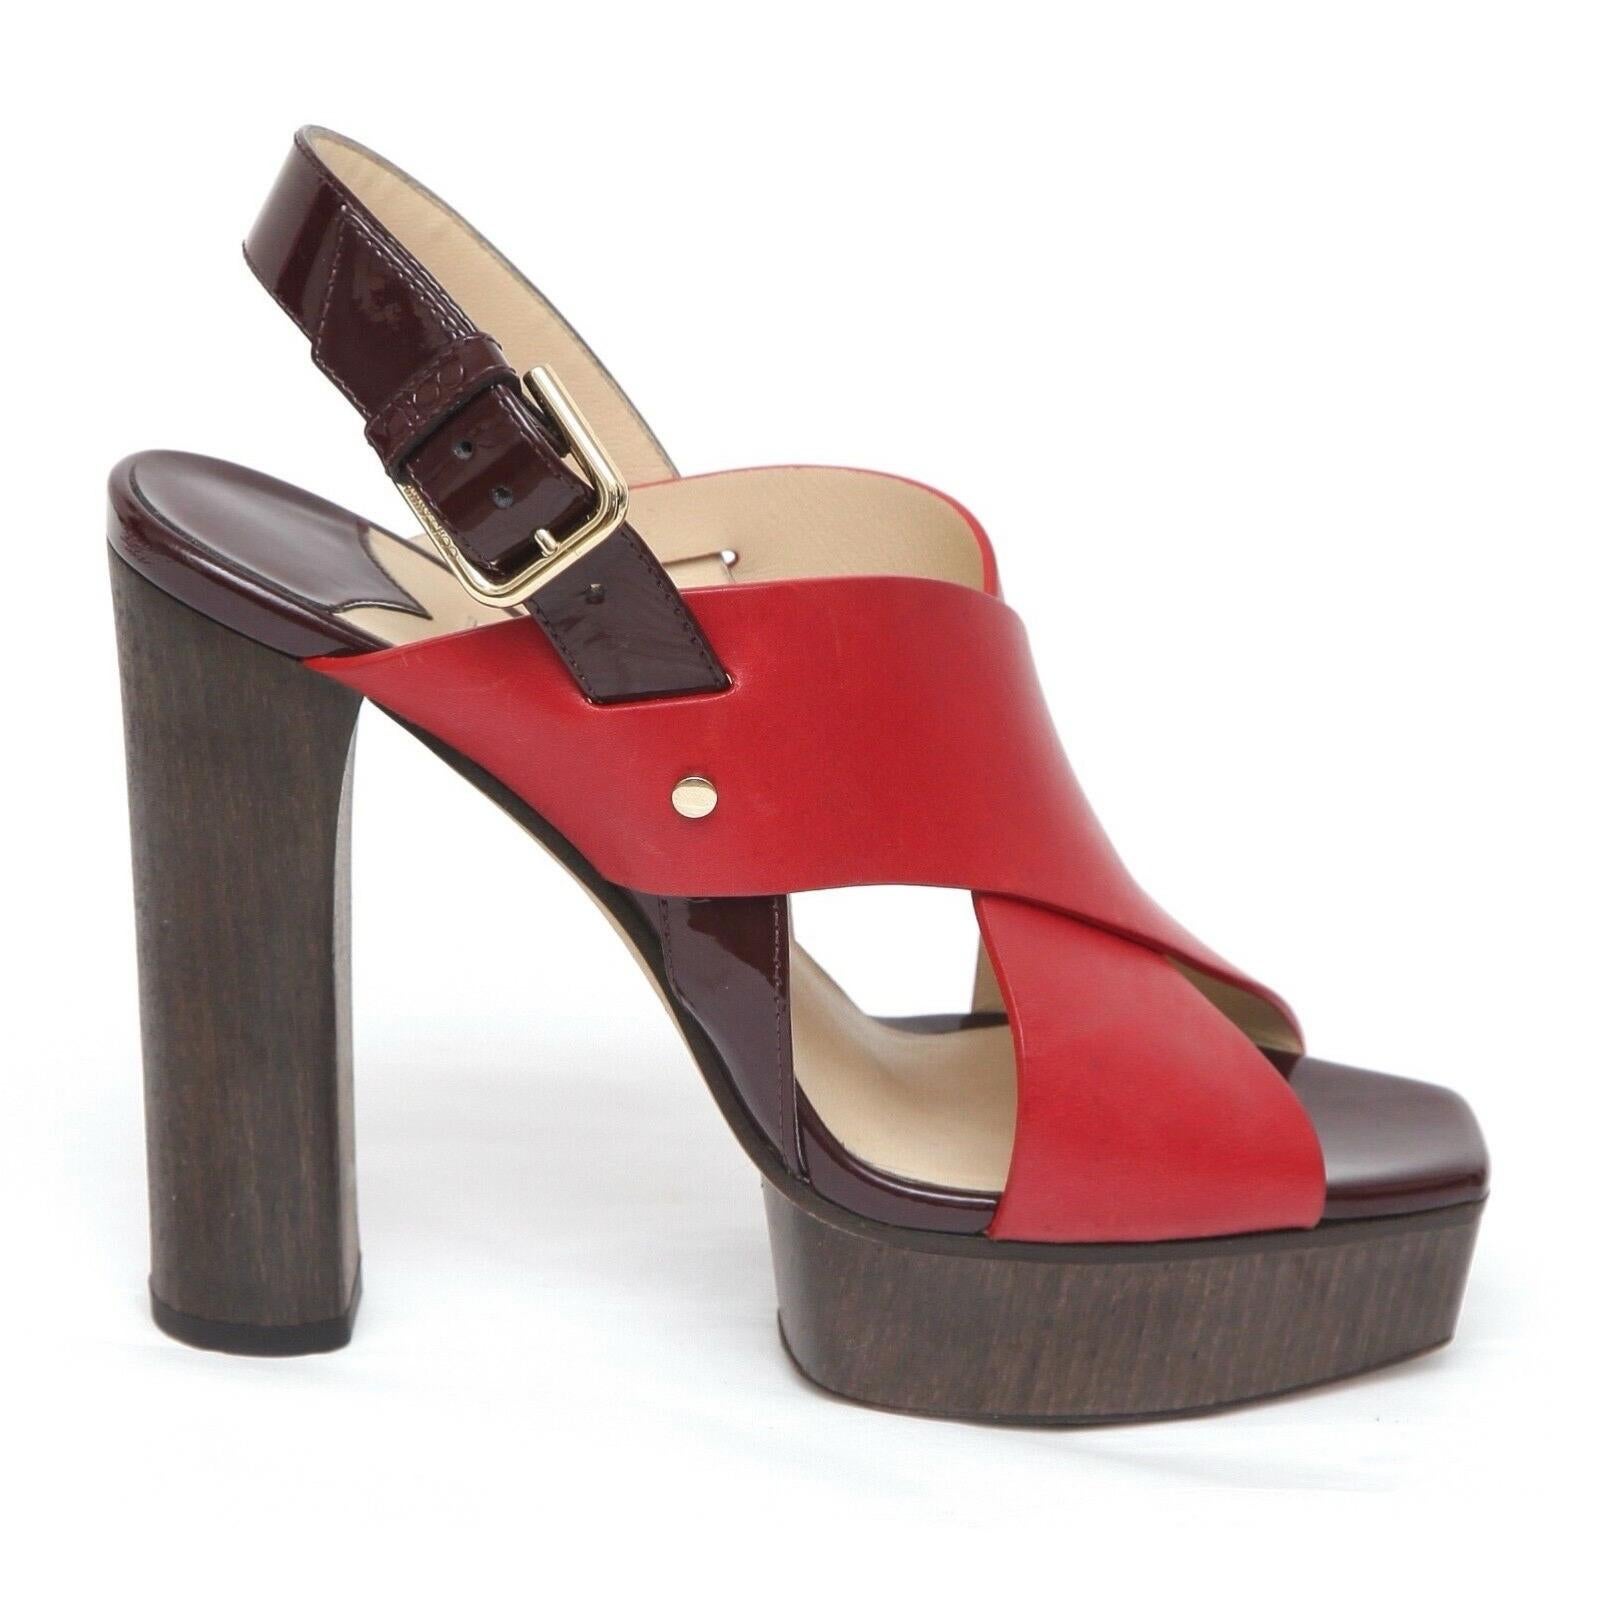 GUARANTEED AUTHENTIC JIMMY CHOO AIX 125 LEATHER LEATHER PLATFORM SANDALS

Retail excluding sales taxes, $950

Design:
- Red leather thick strap over vamp.
- Wood platform and heel.
- Patent leather trim, base and toe of insole.
- Gold-tone metal